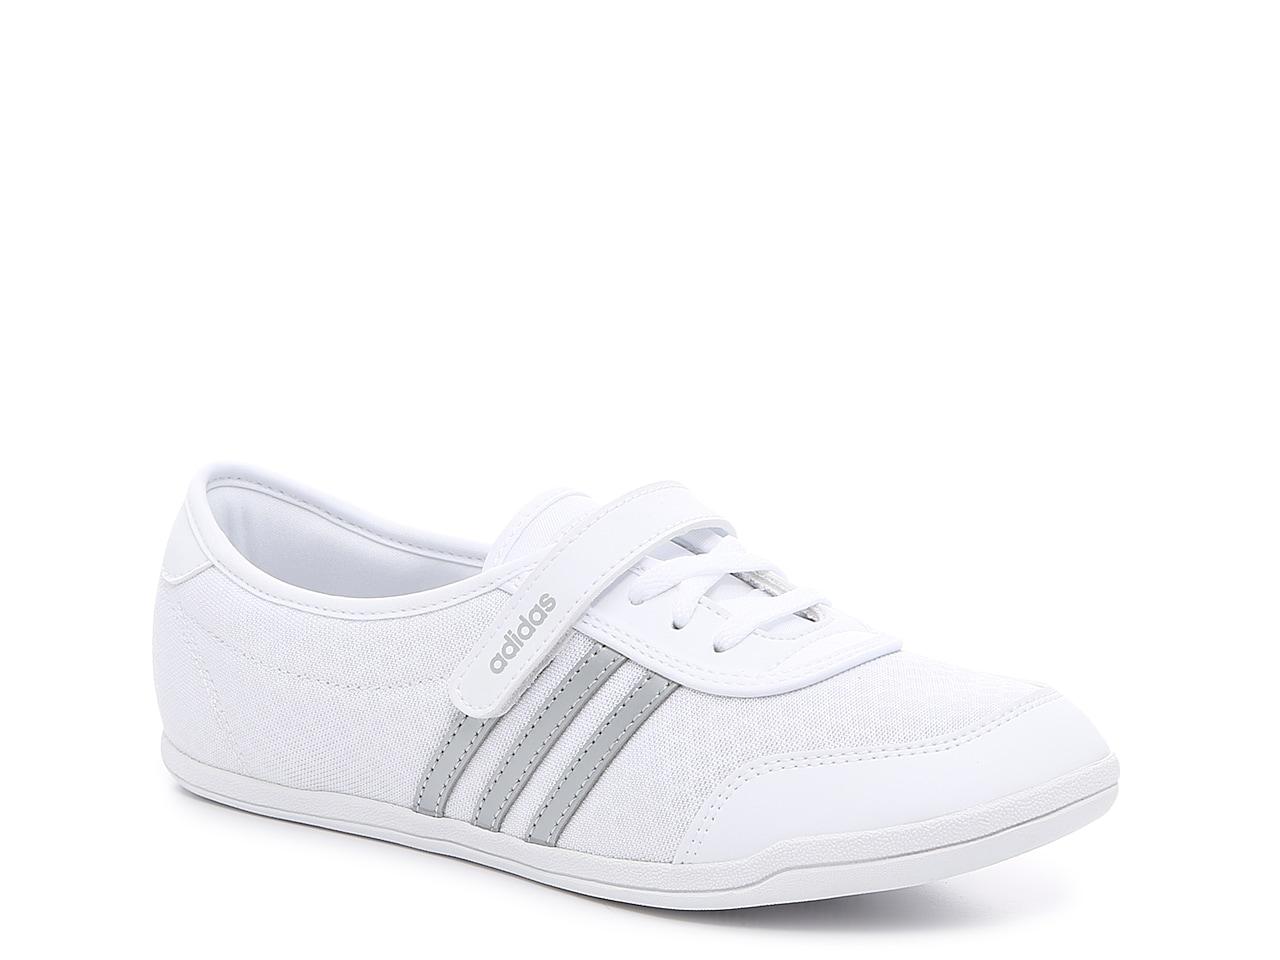 adidas Diona Slip-on Sneaker in White | Lyst